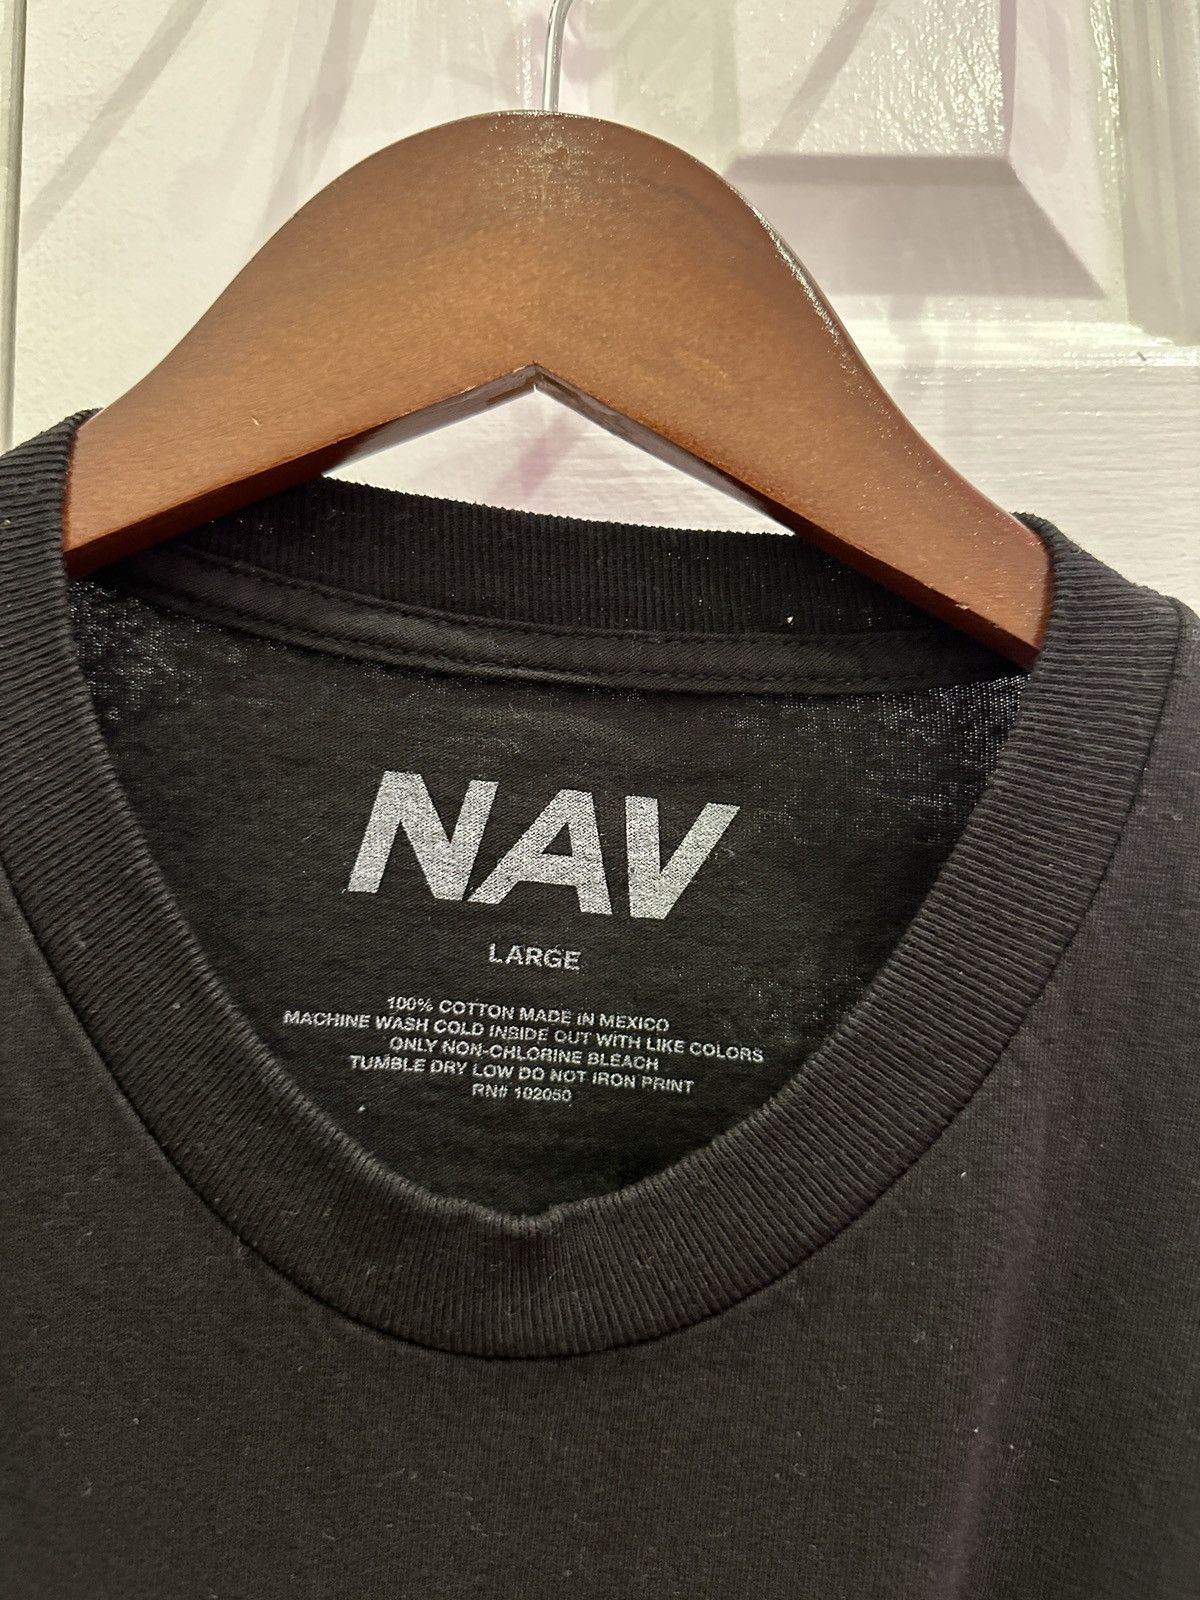 Vlone Vlone X Nav “Good Intentions” Tee Size US L / EU 52-54 / 3 - 3 Preview